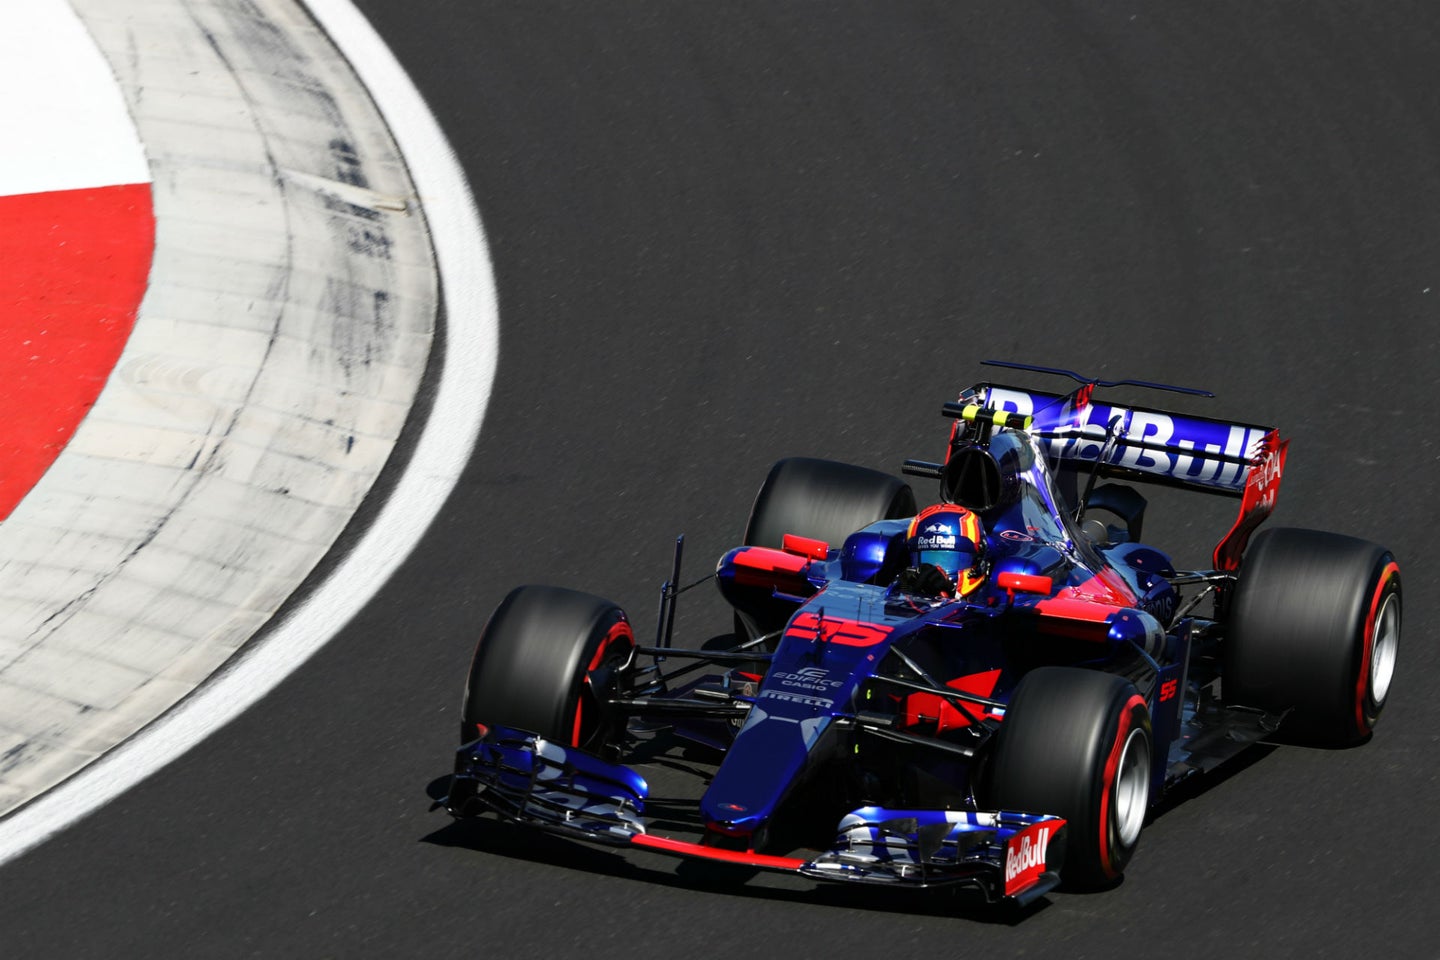 Formula One Needs ‘a Solution’ for More Competitive Grid, Sainz Jr. Says